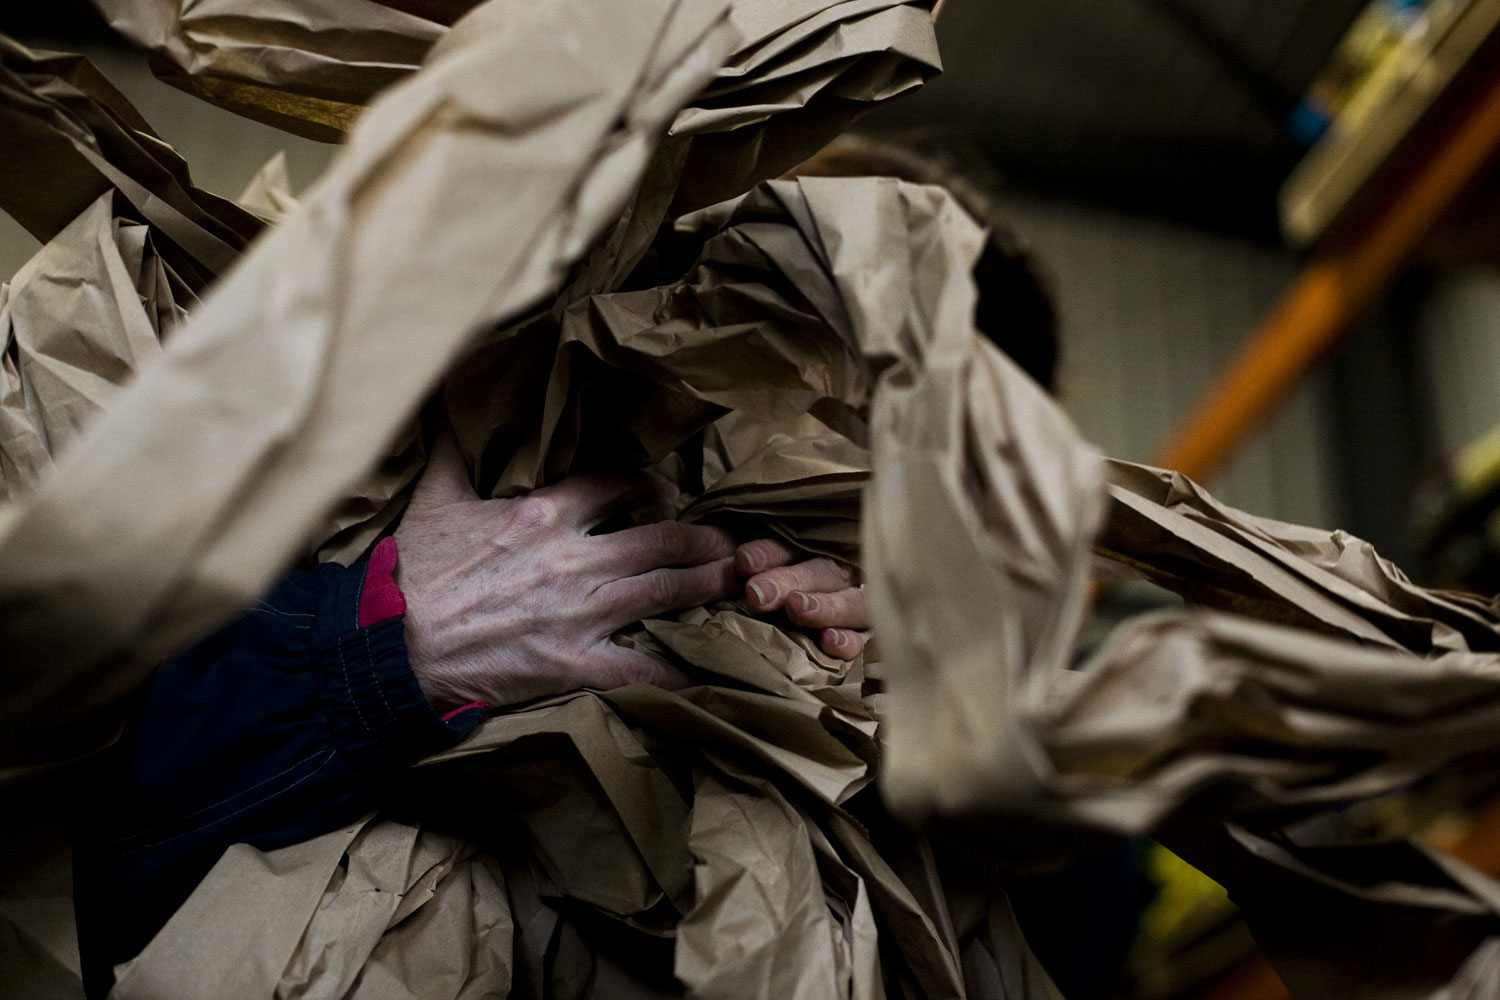 Packing material, 2008